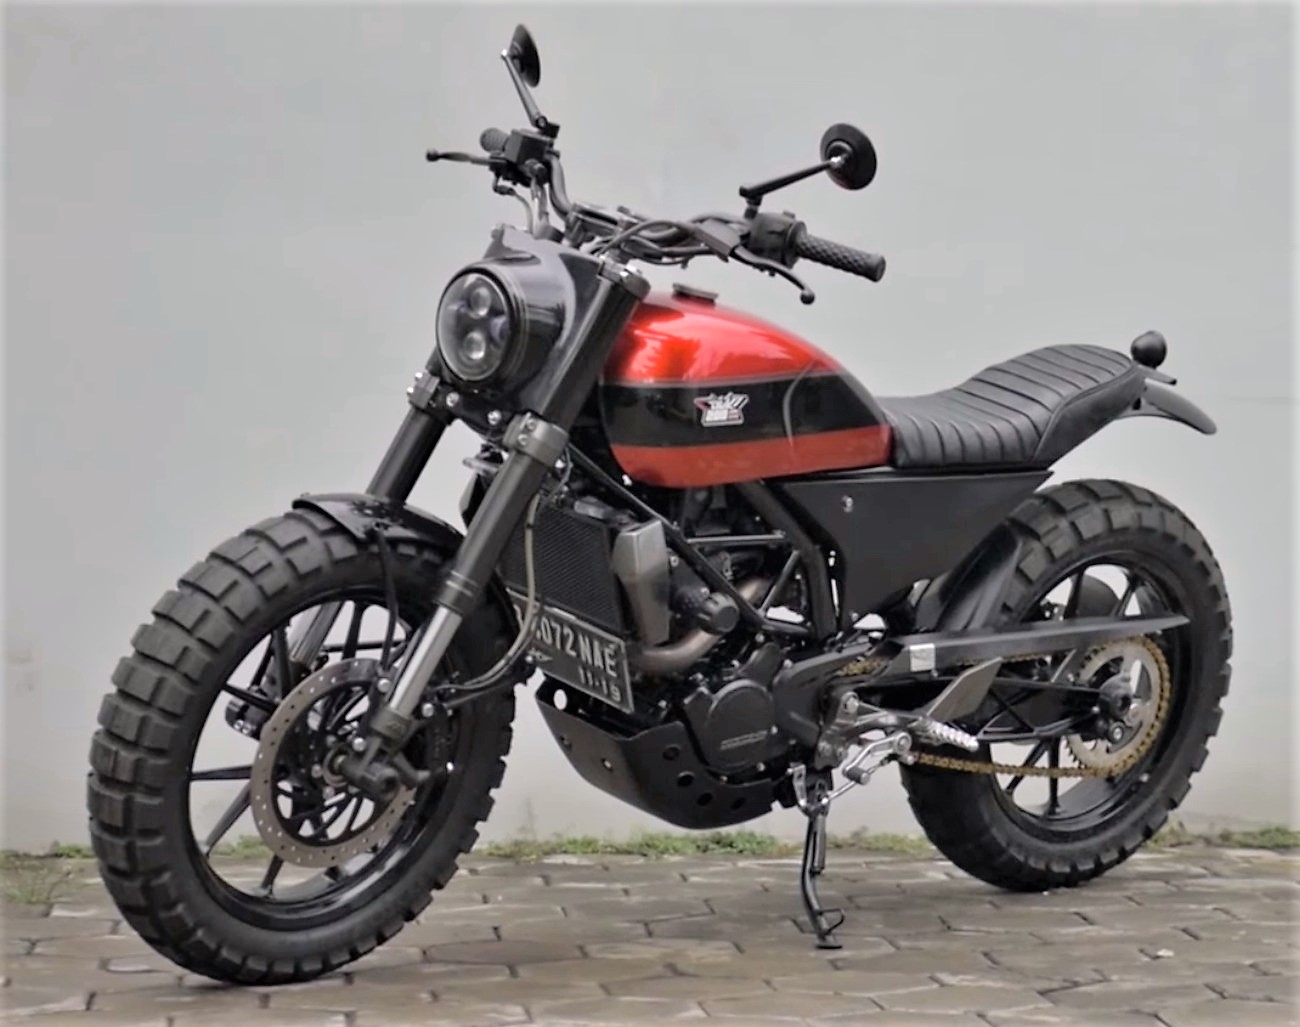 Meet Awesomely Customized KTM Duke 200 by Atenx Katros - front